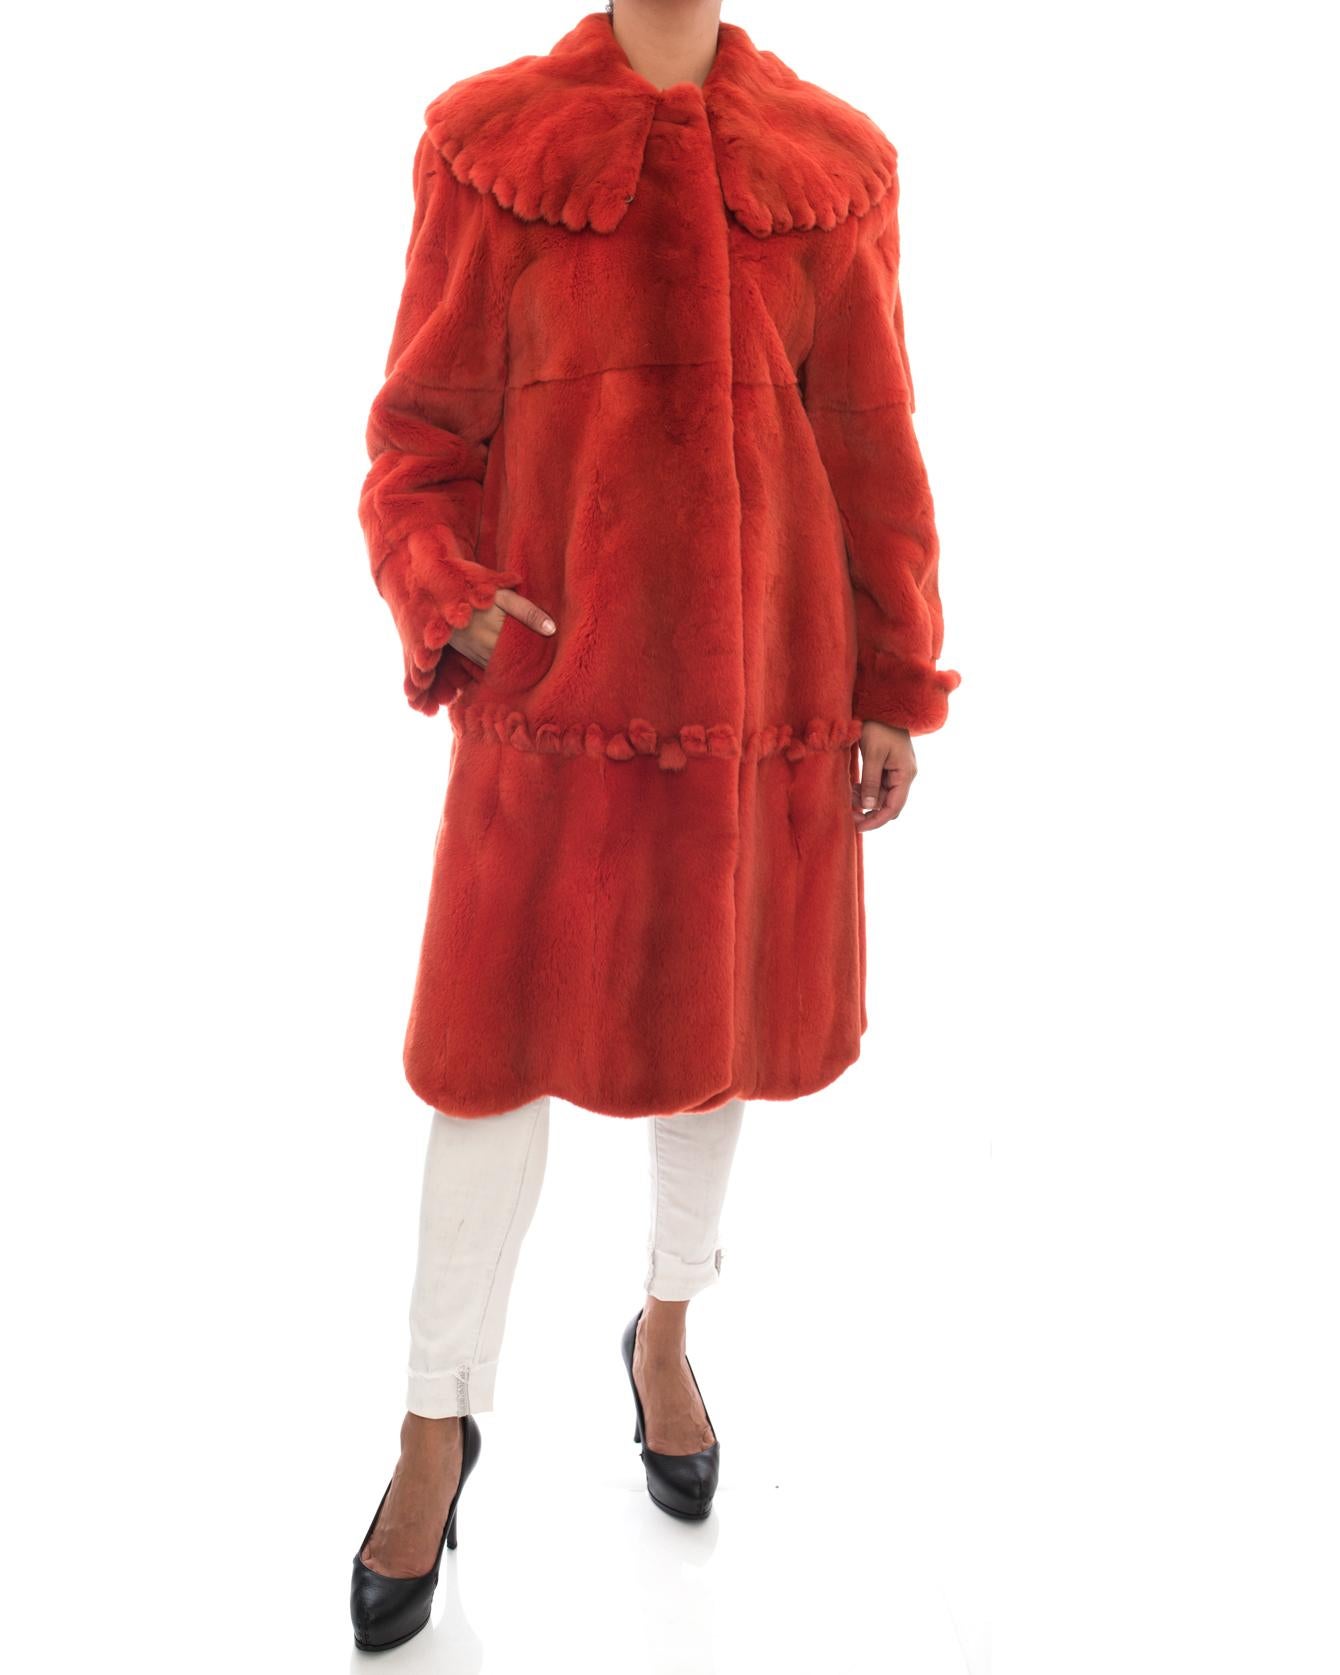 Vintage Adolfo Birger Christensen Burnt Orange Sheared Mink Fur Coat.  Swing style design with wide Peter Pan collar. Scalloped design at cuffs, collar and across hip.  Side slit pockets on seam. Will fit USA 10. Garment bust measures 44” and is